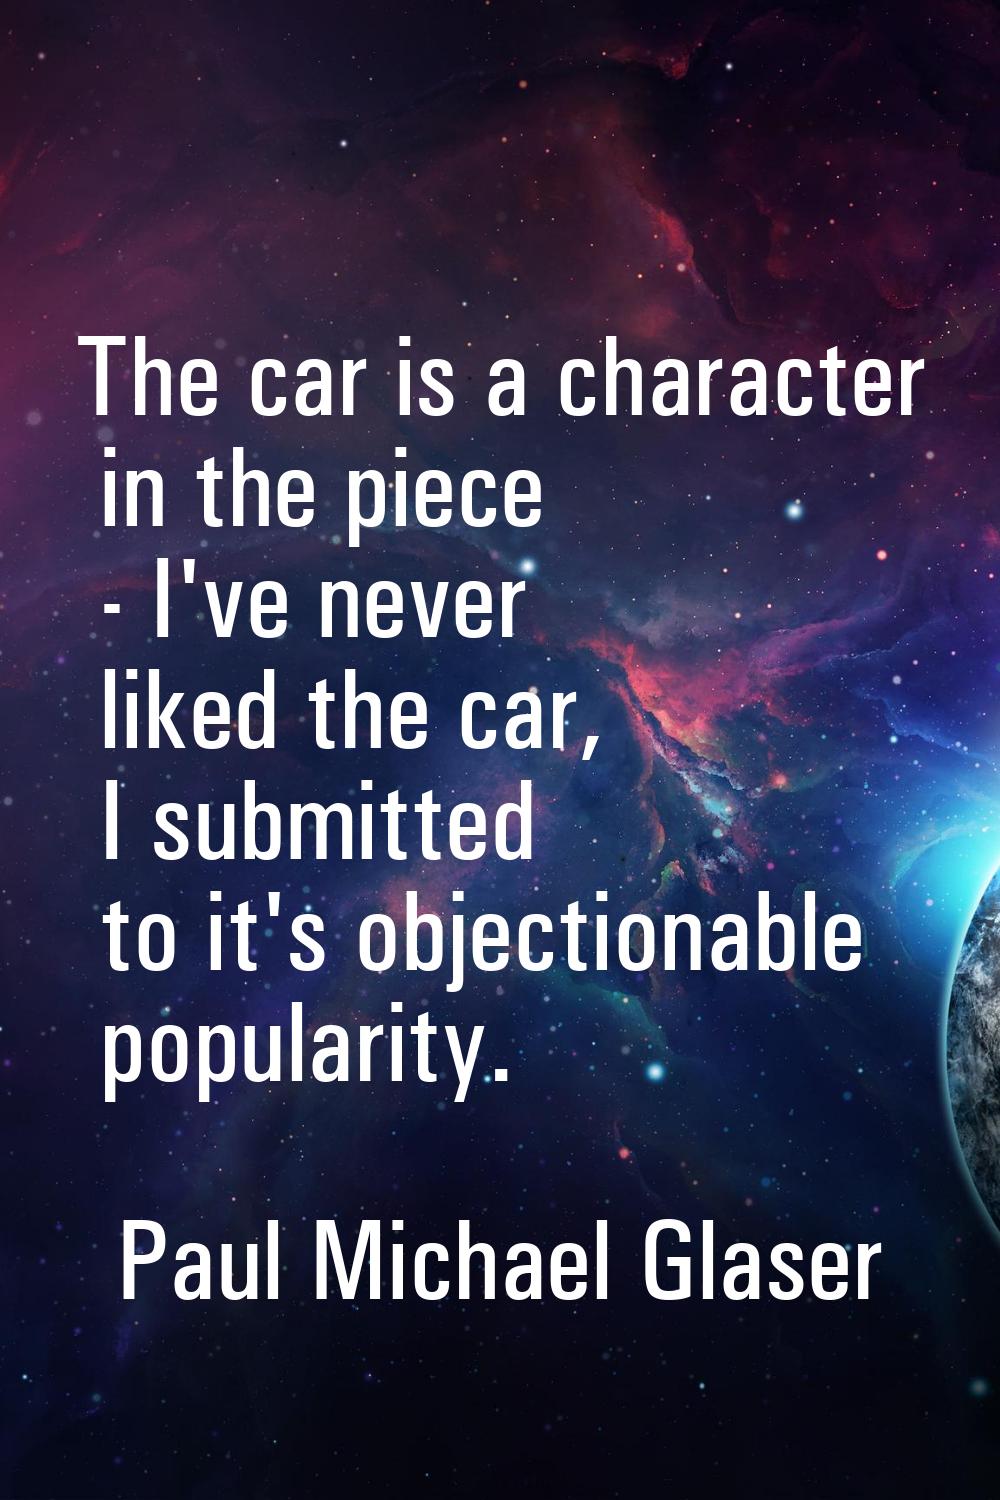 The car is a character in the piece - I've never liked the car, I submitted to it's objectionable p